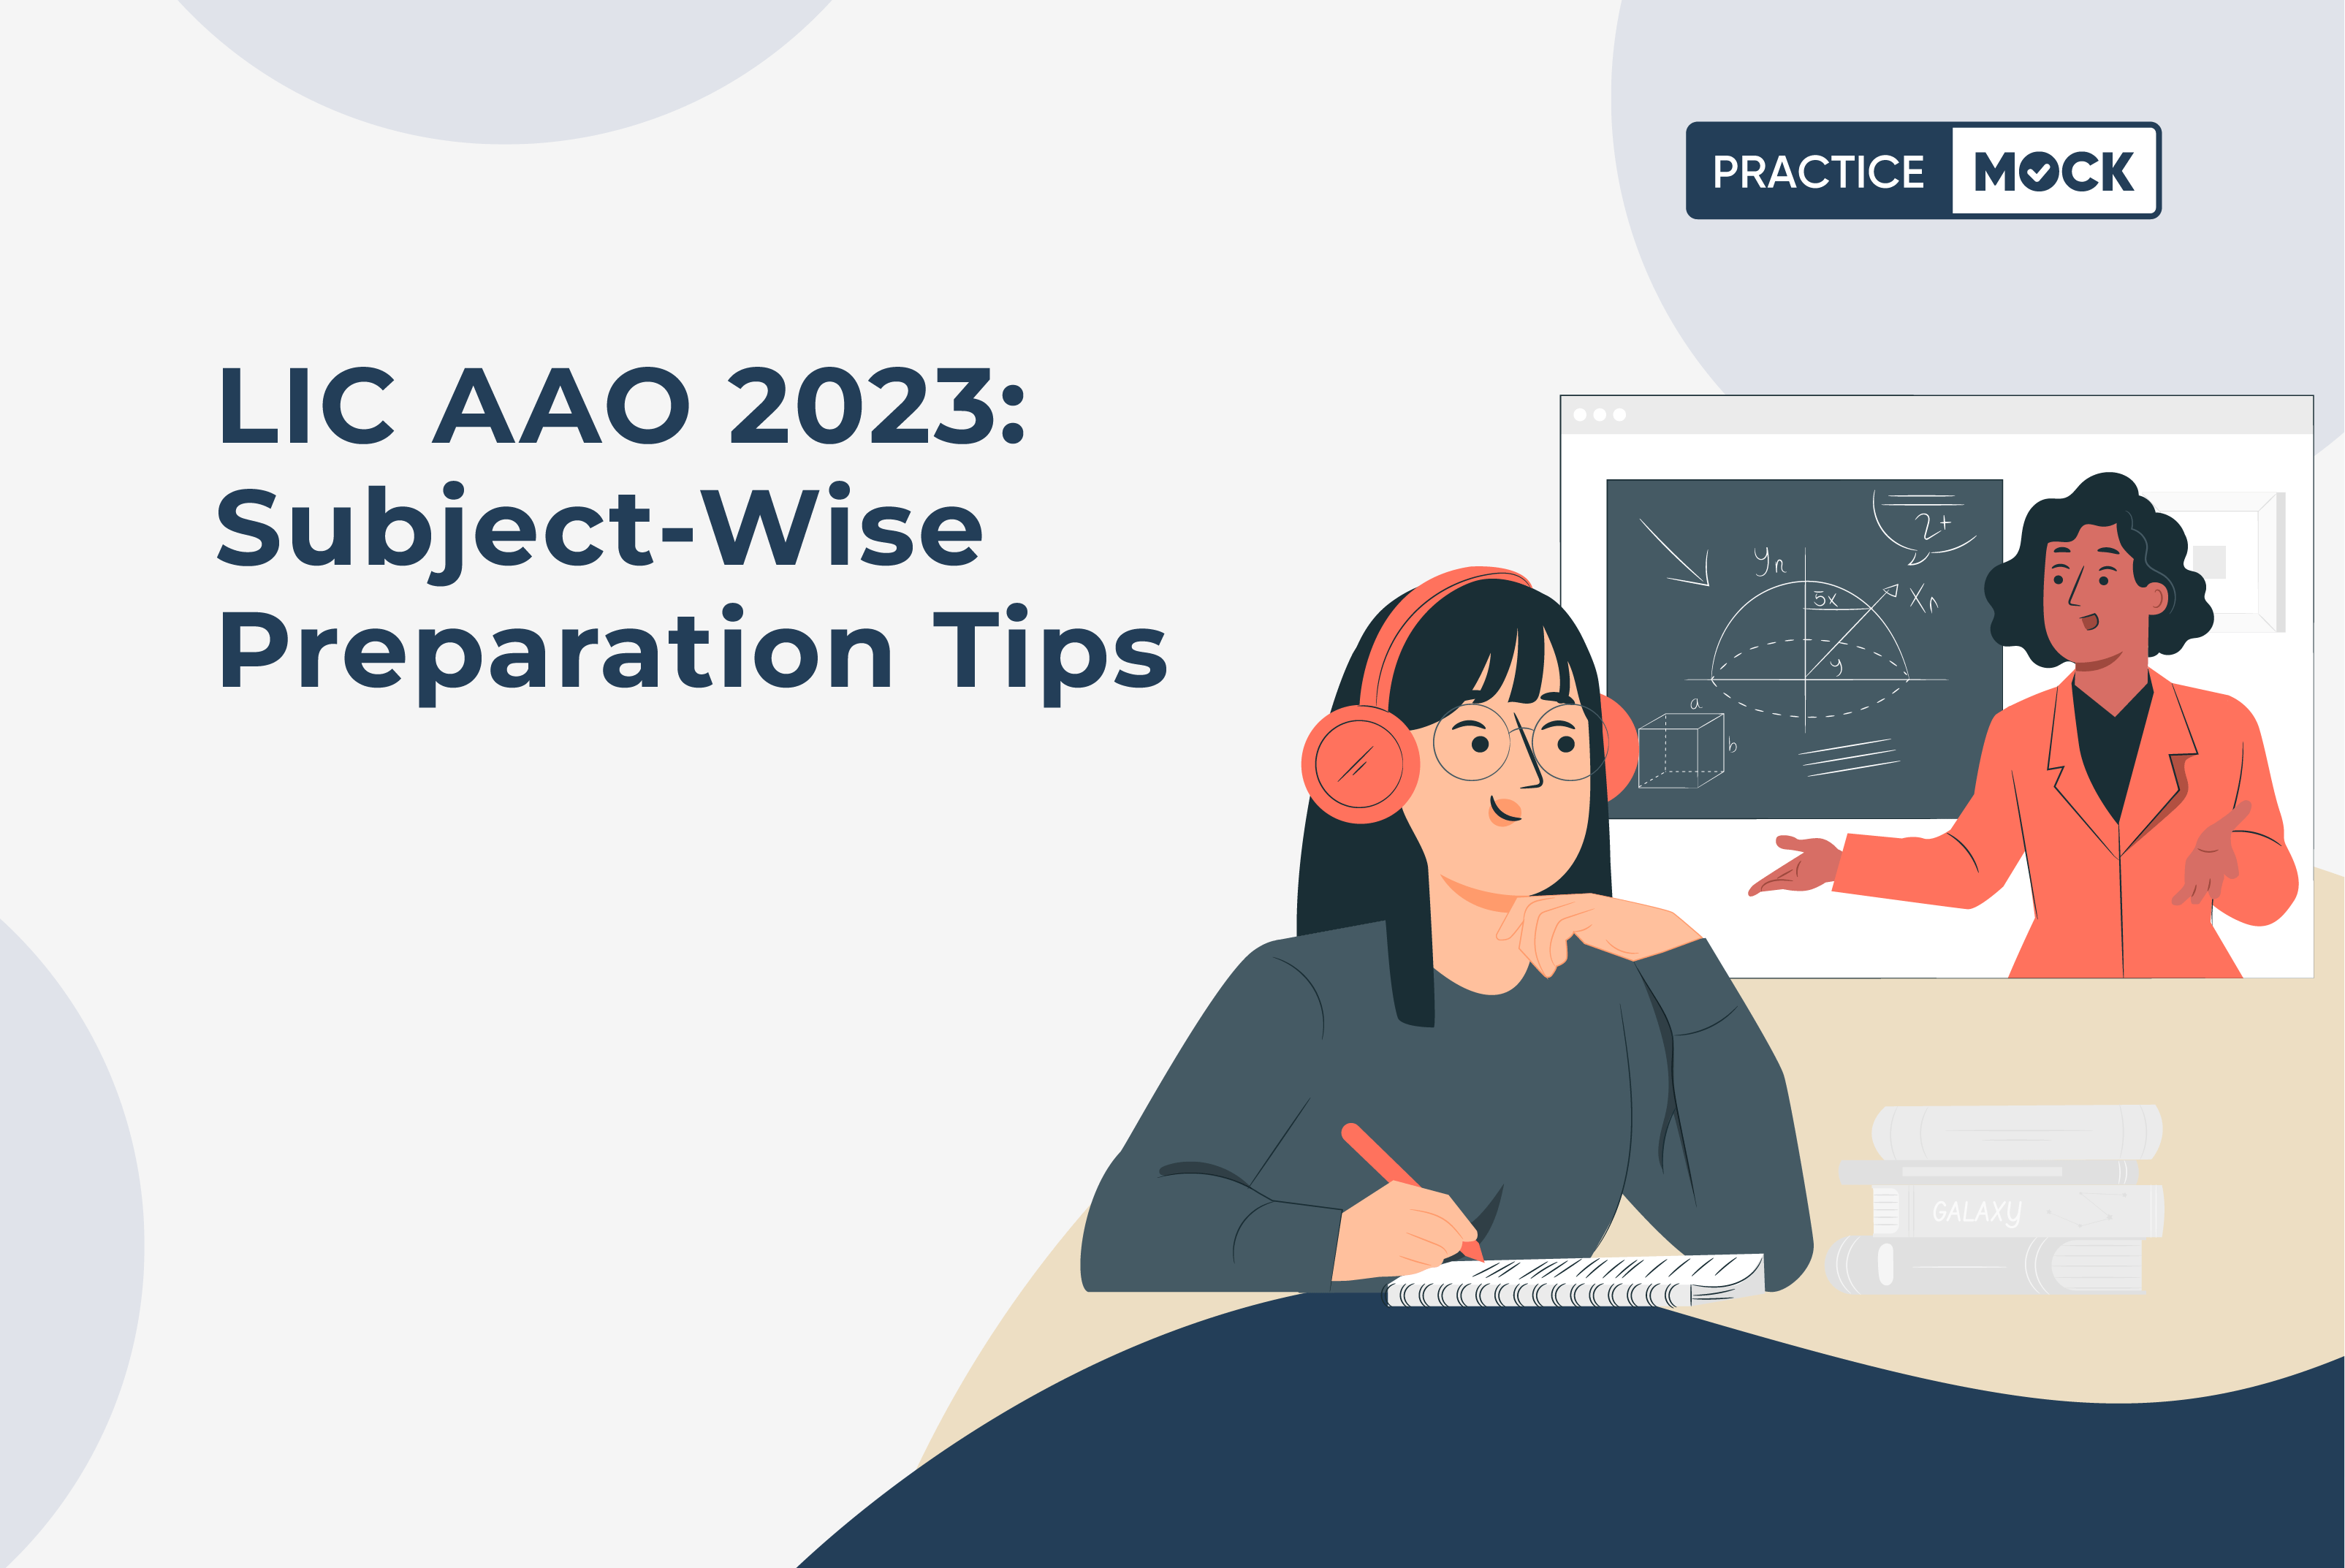 LIC AAO 2023-Subject-Wise Preparation Tips for Success